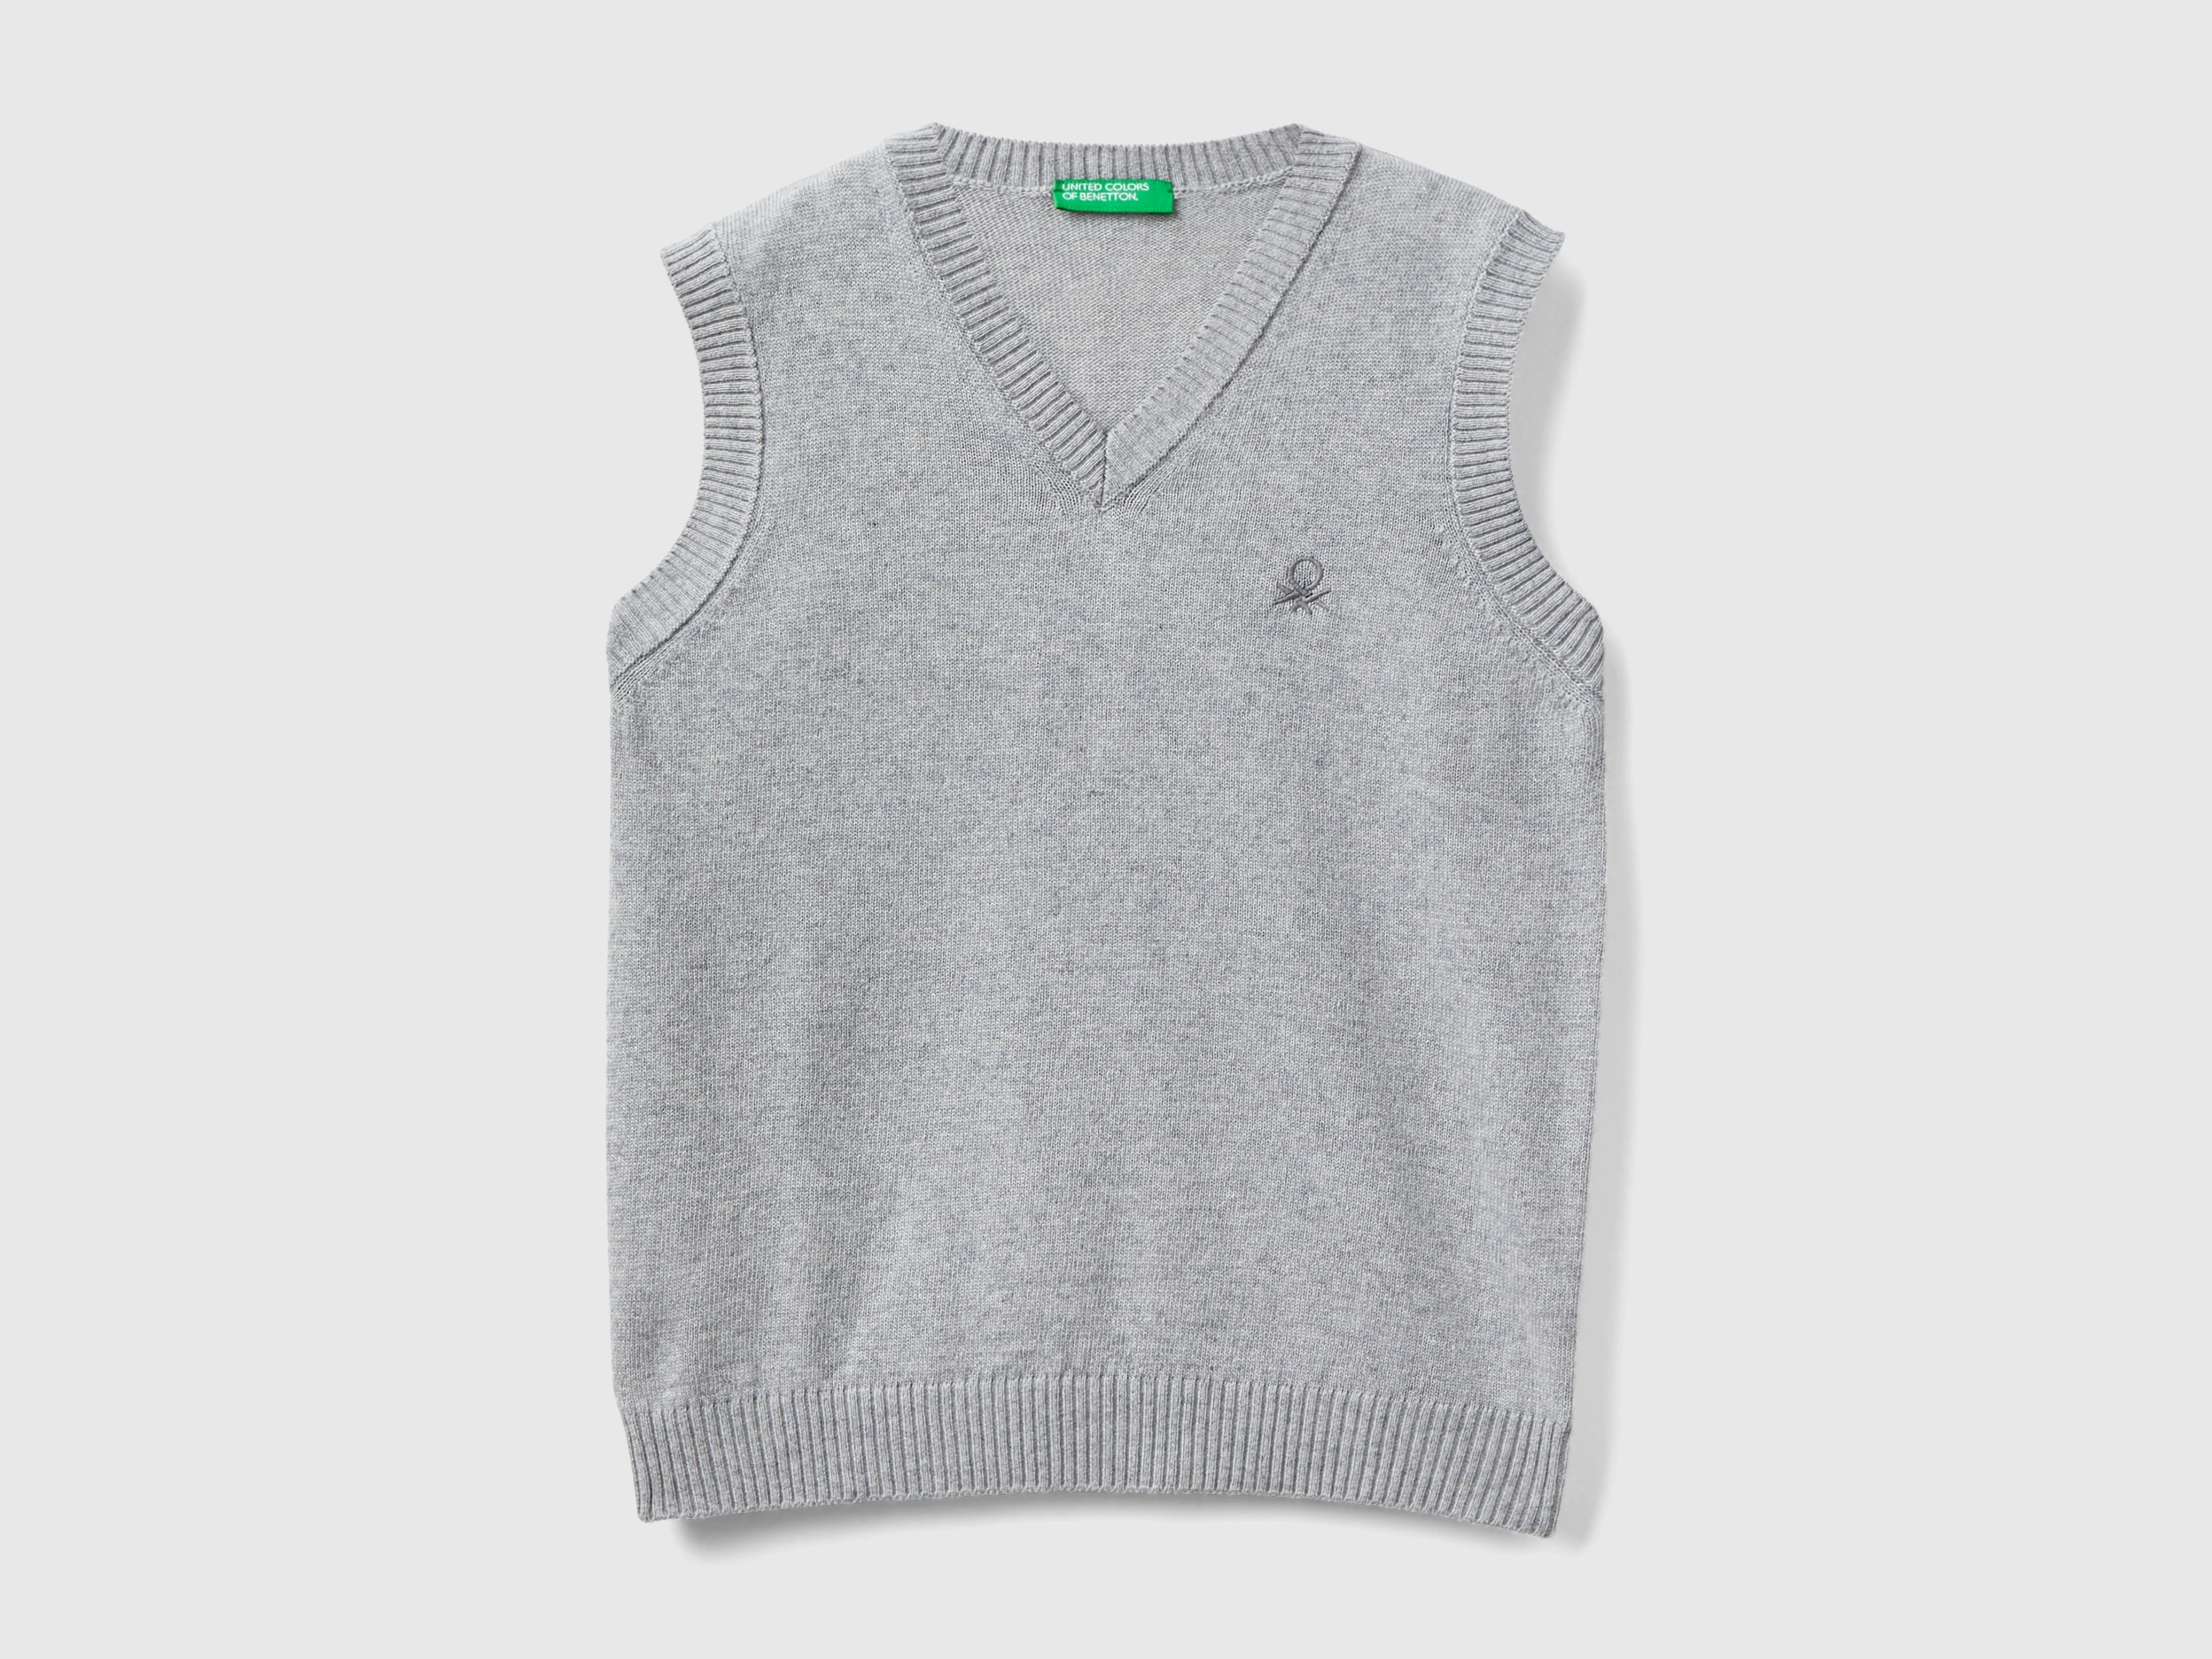 Benetton, Vest In Cashmere And Wool Blend, size M, Light Gray, Kids